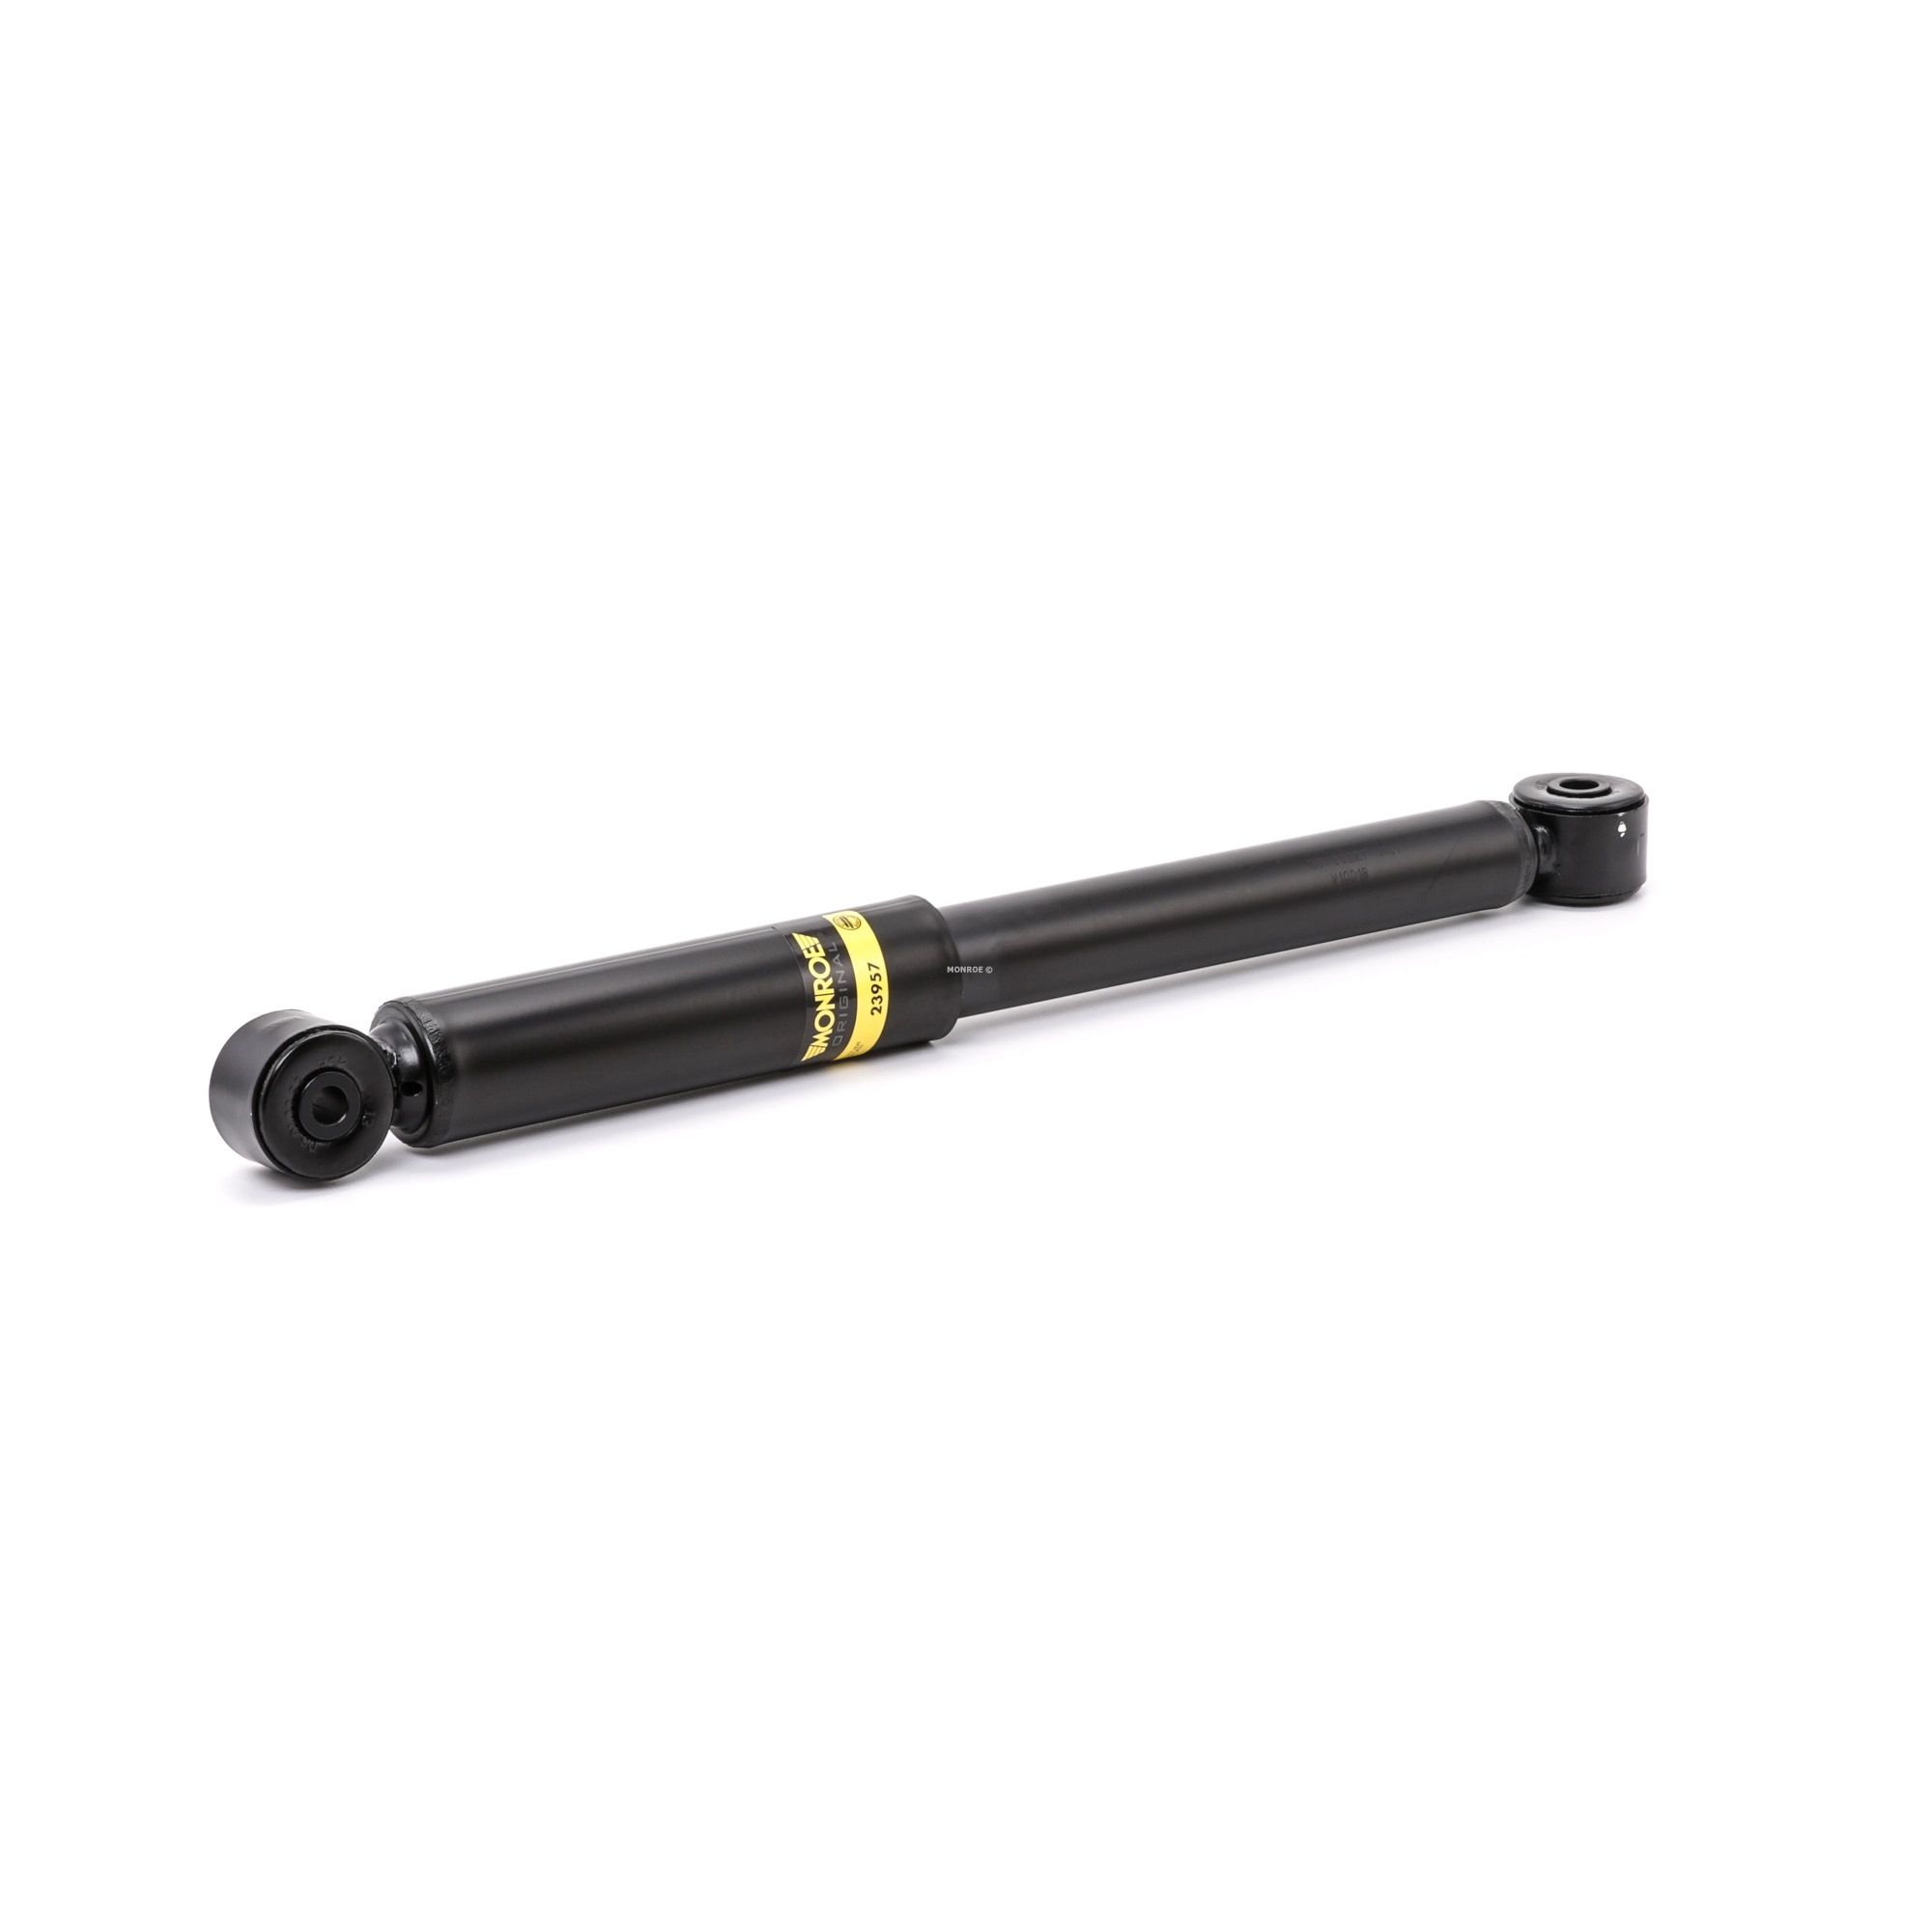 Shock absorber MONROE 23957 - Ford GALAXY Shock absorption spare parts order